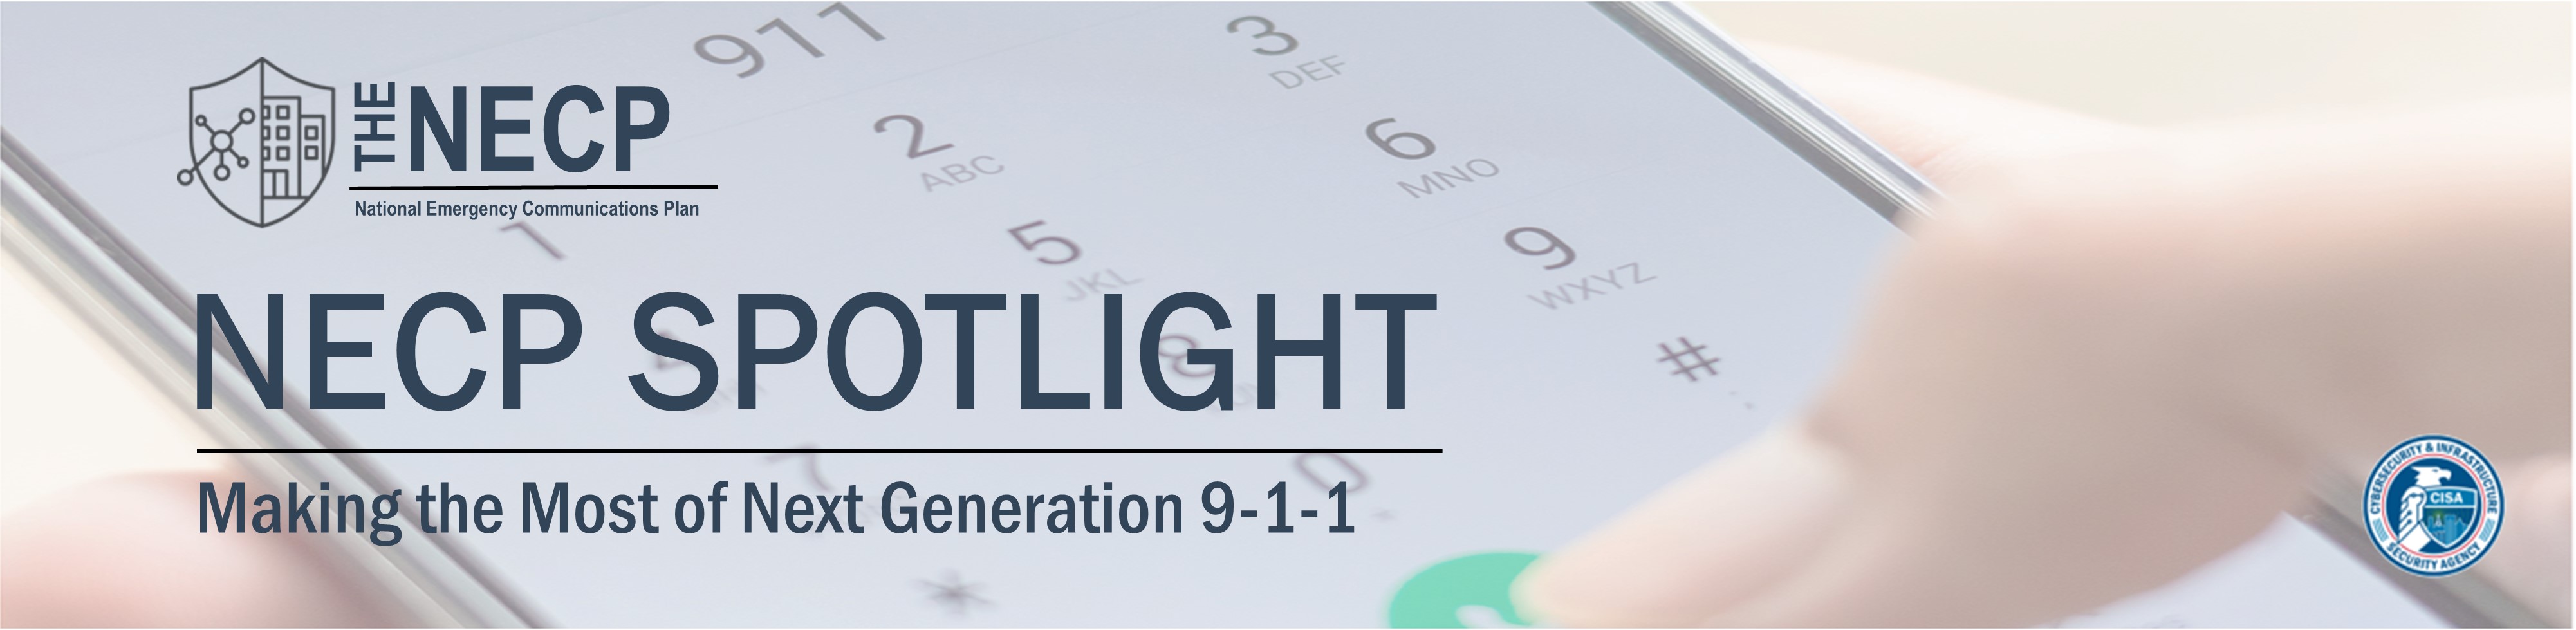 The NECP. National Emergency Communications Plan. NECP Spotlight. Making the Most of Next Generation 9-1-1